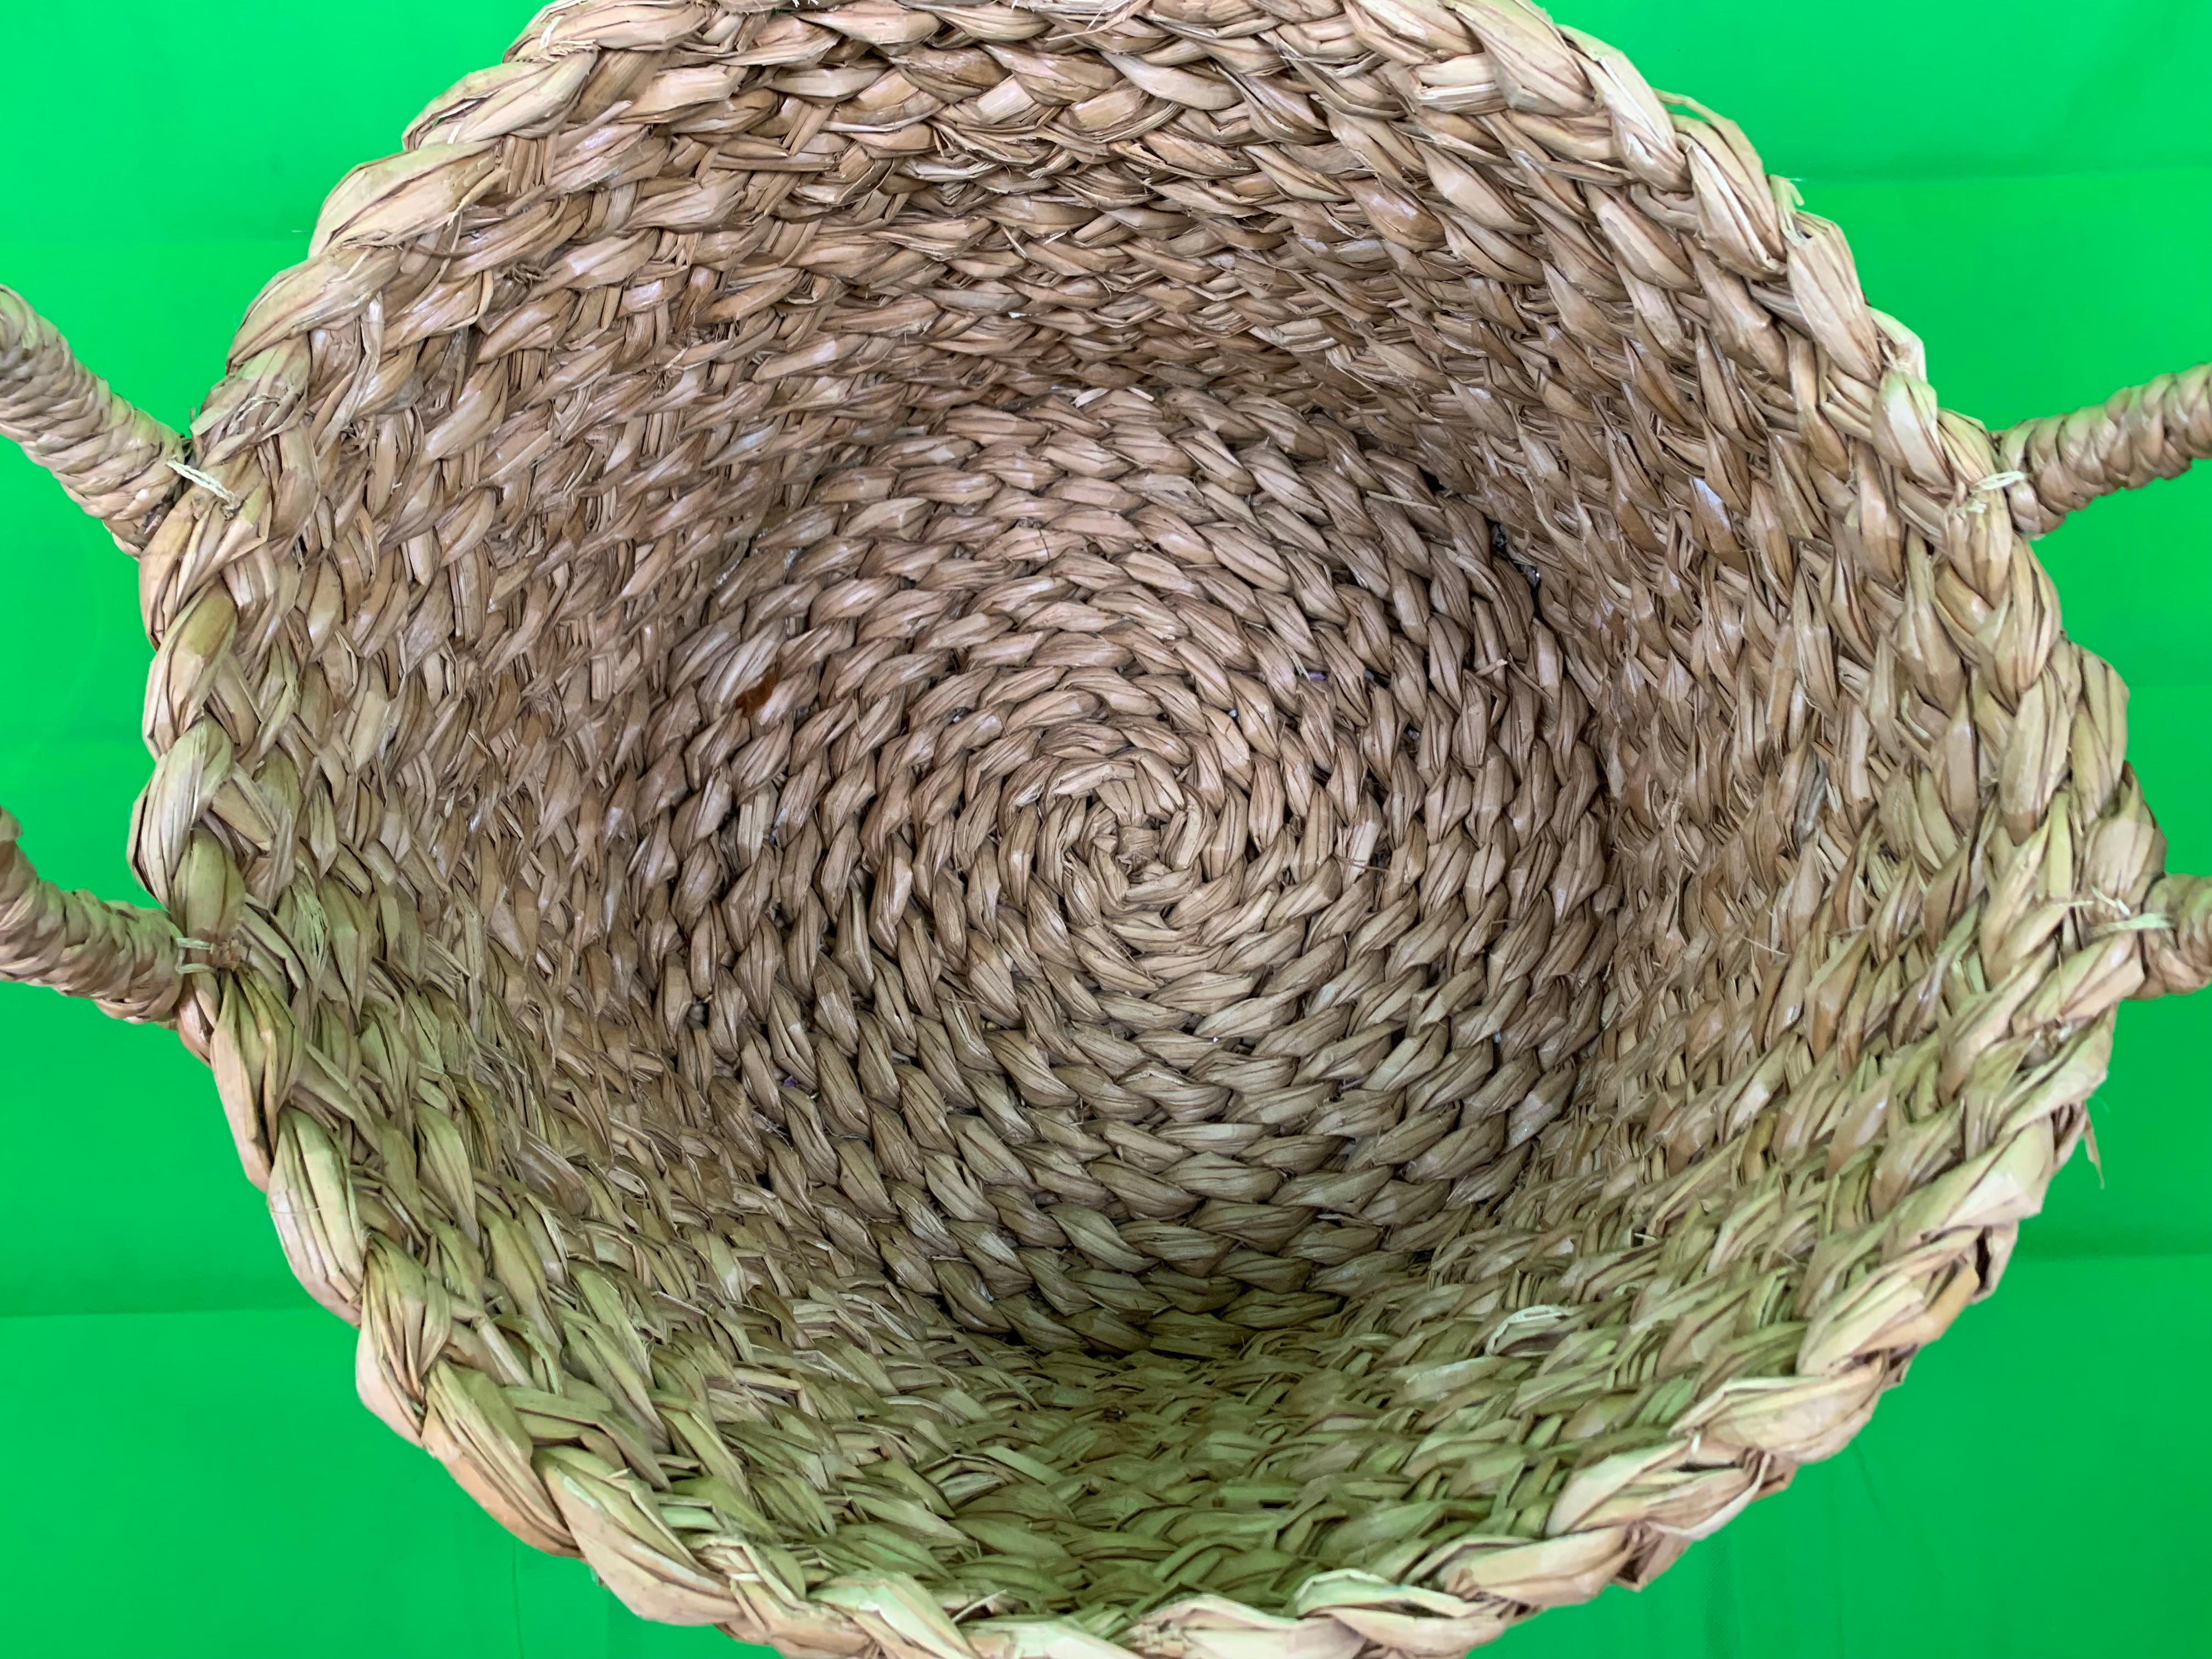 Hand-Woven Large Hand Woven Seagrass Basket with Two Handles